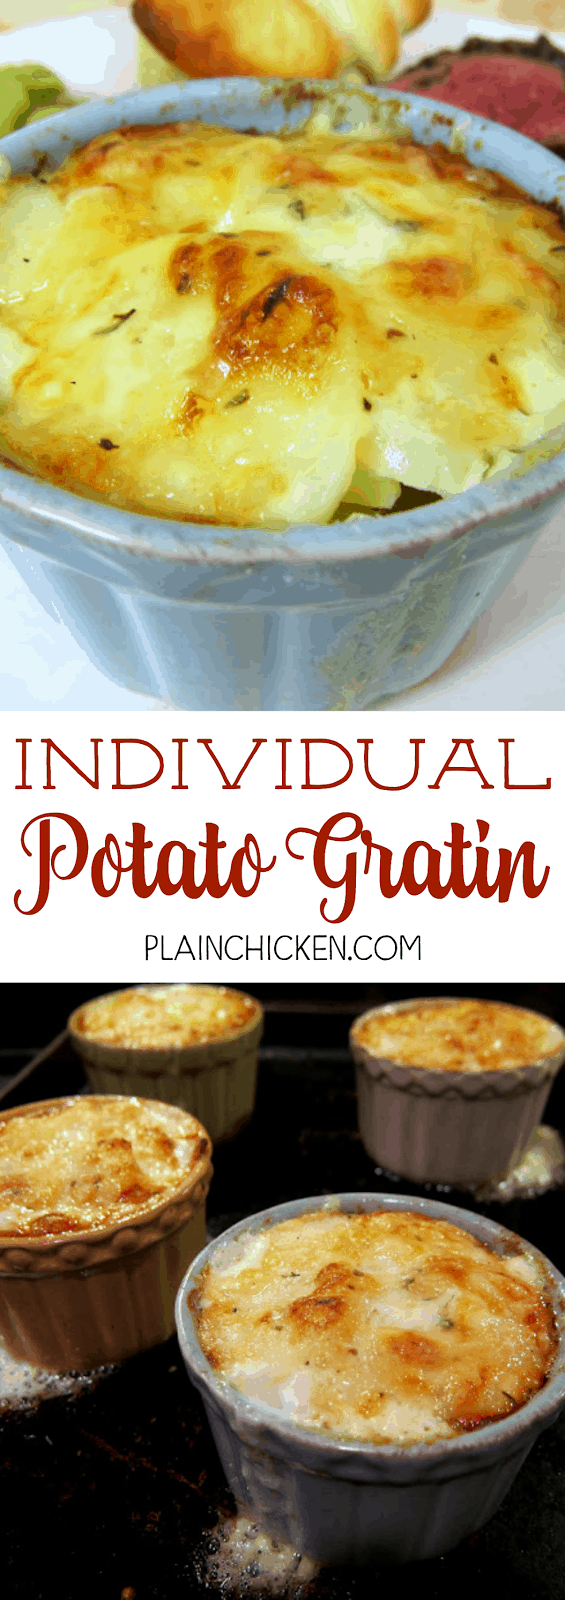 Individual Potato Gratin - thinly sliced potatoes, heavy cream, thyme and gruyere cheese - bake in individual ramekins. SO easy and SO delicious. Ready in under 30 minutes. One of our favorite potato side dishes!!! Everyone loves these potatoes.